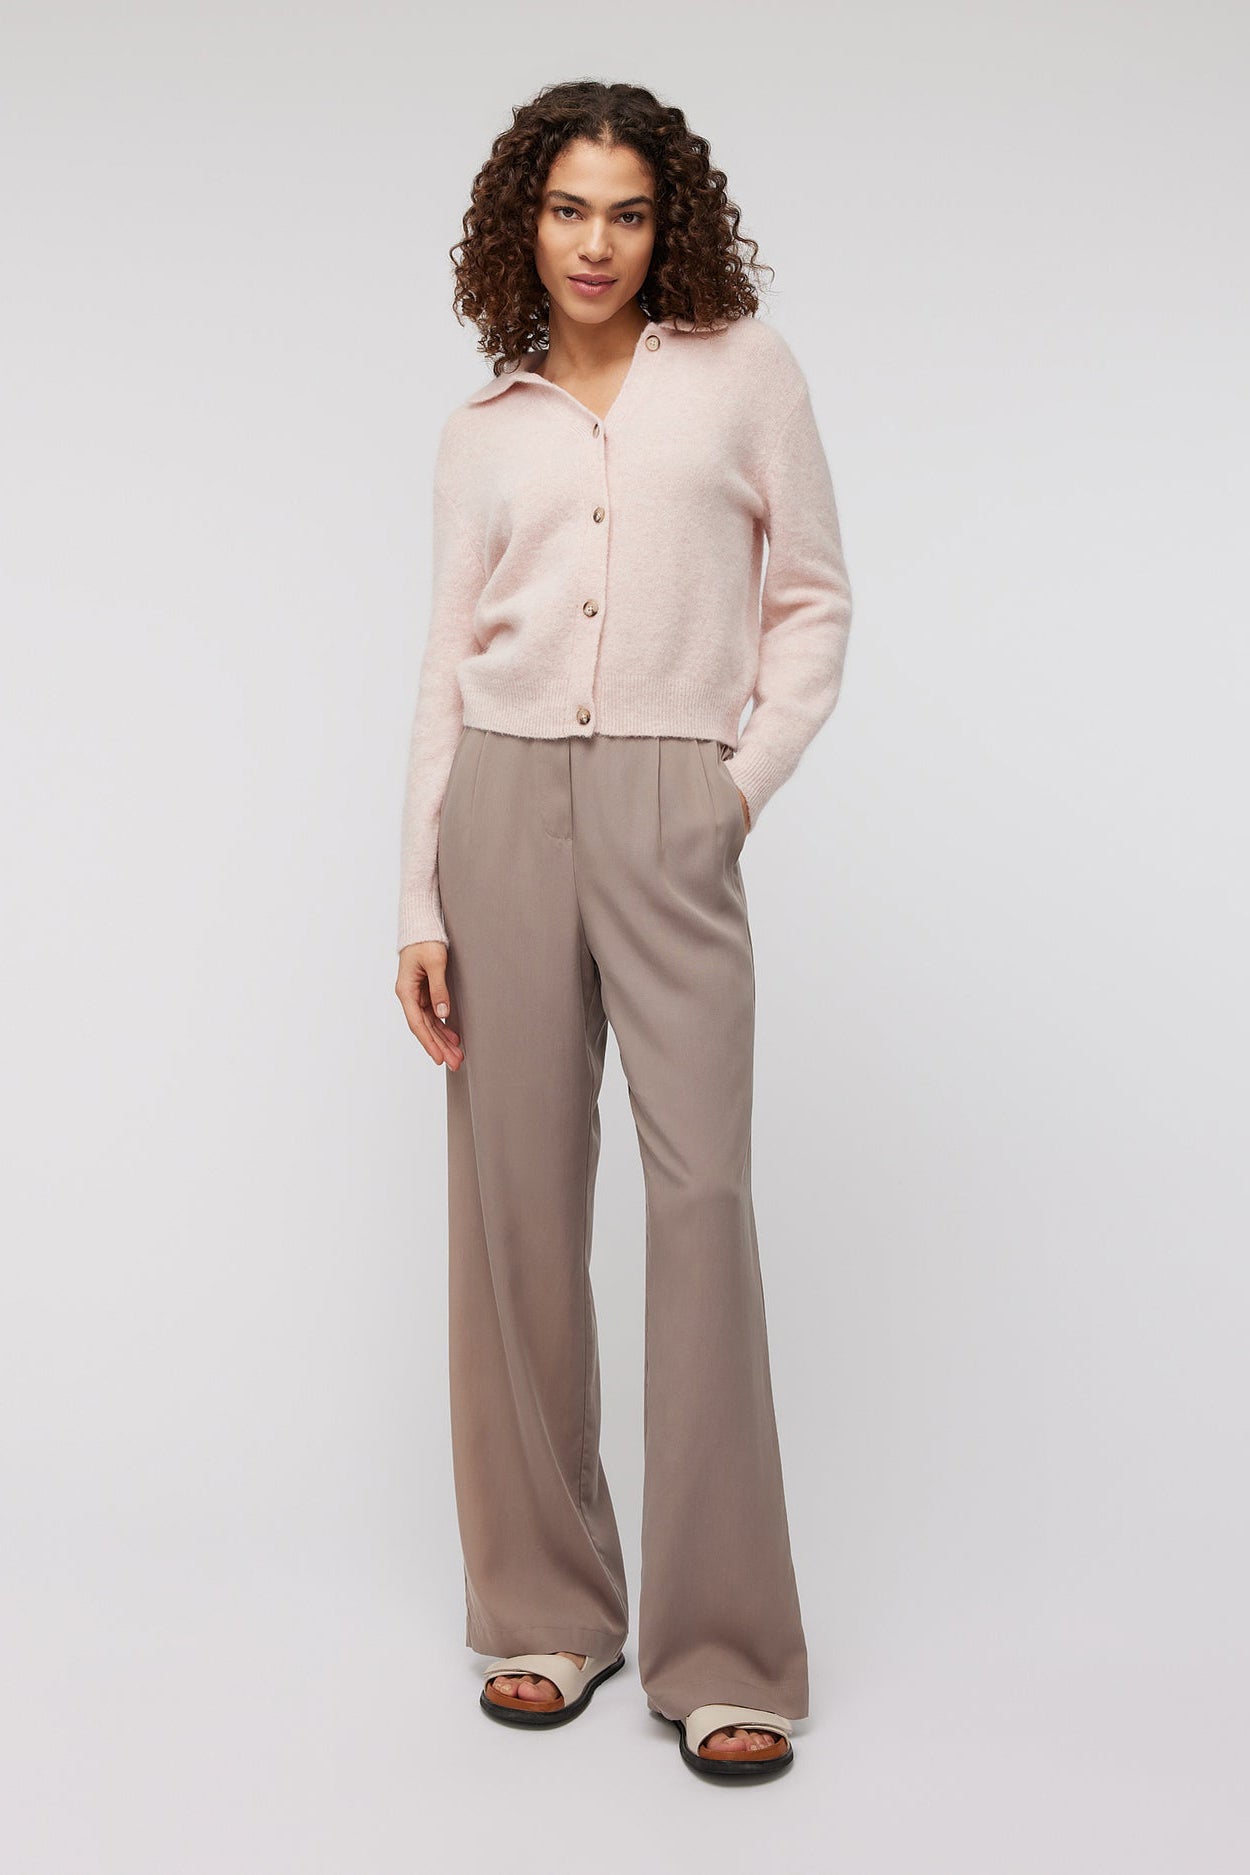 Knit-ted Wendy Pants - Sepia - RUM Amsterdam